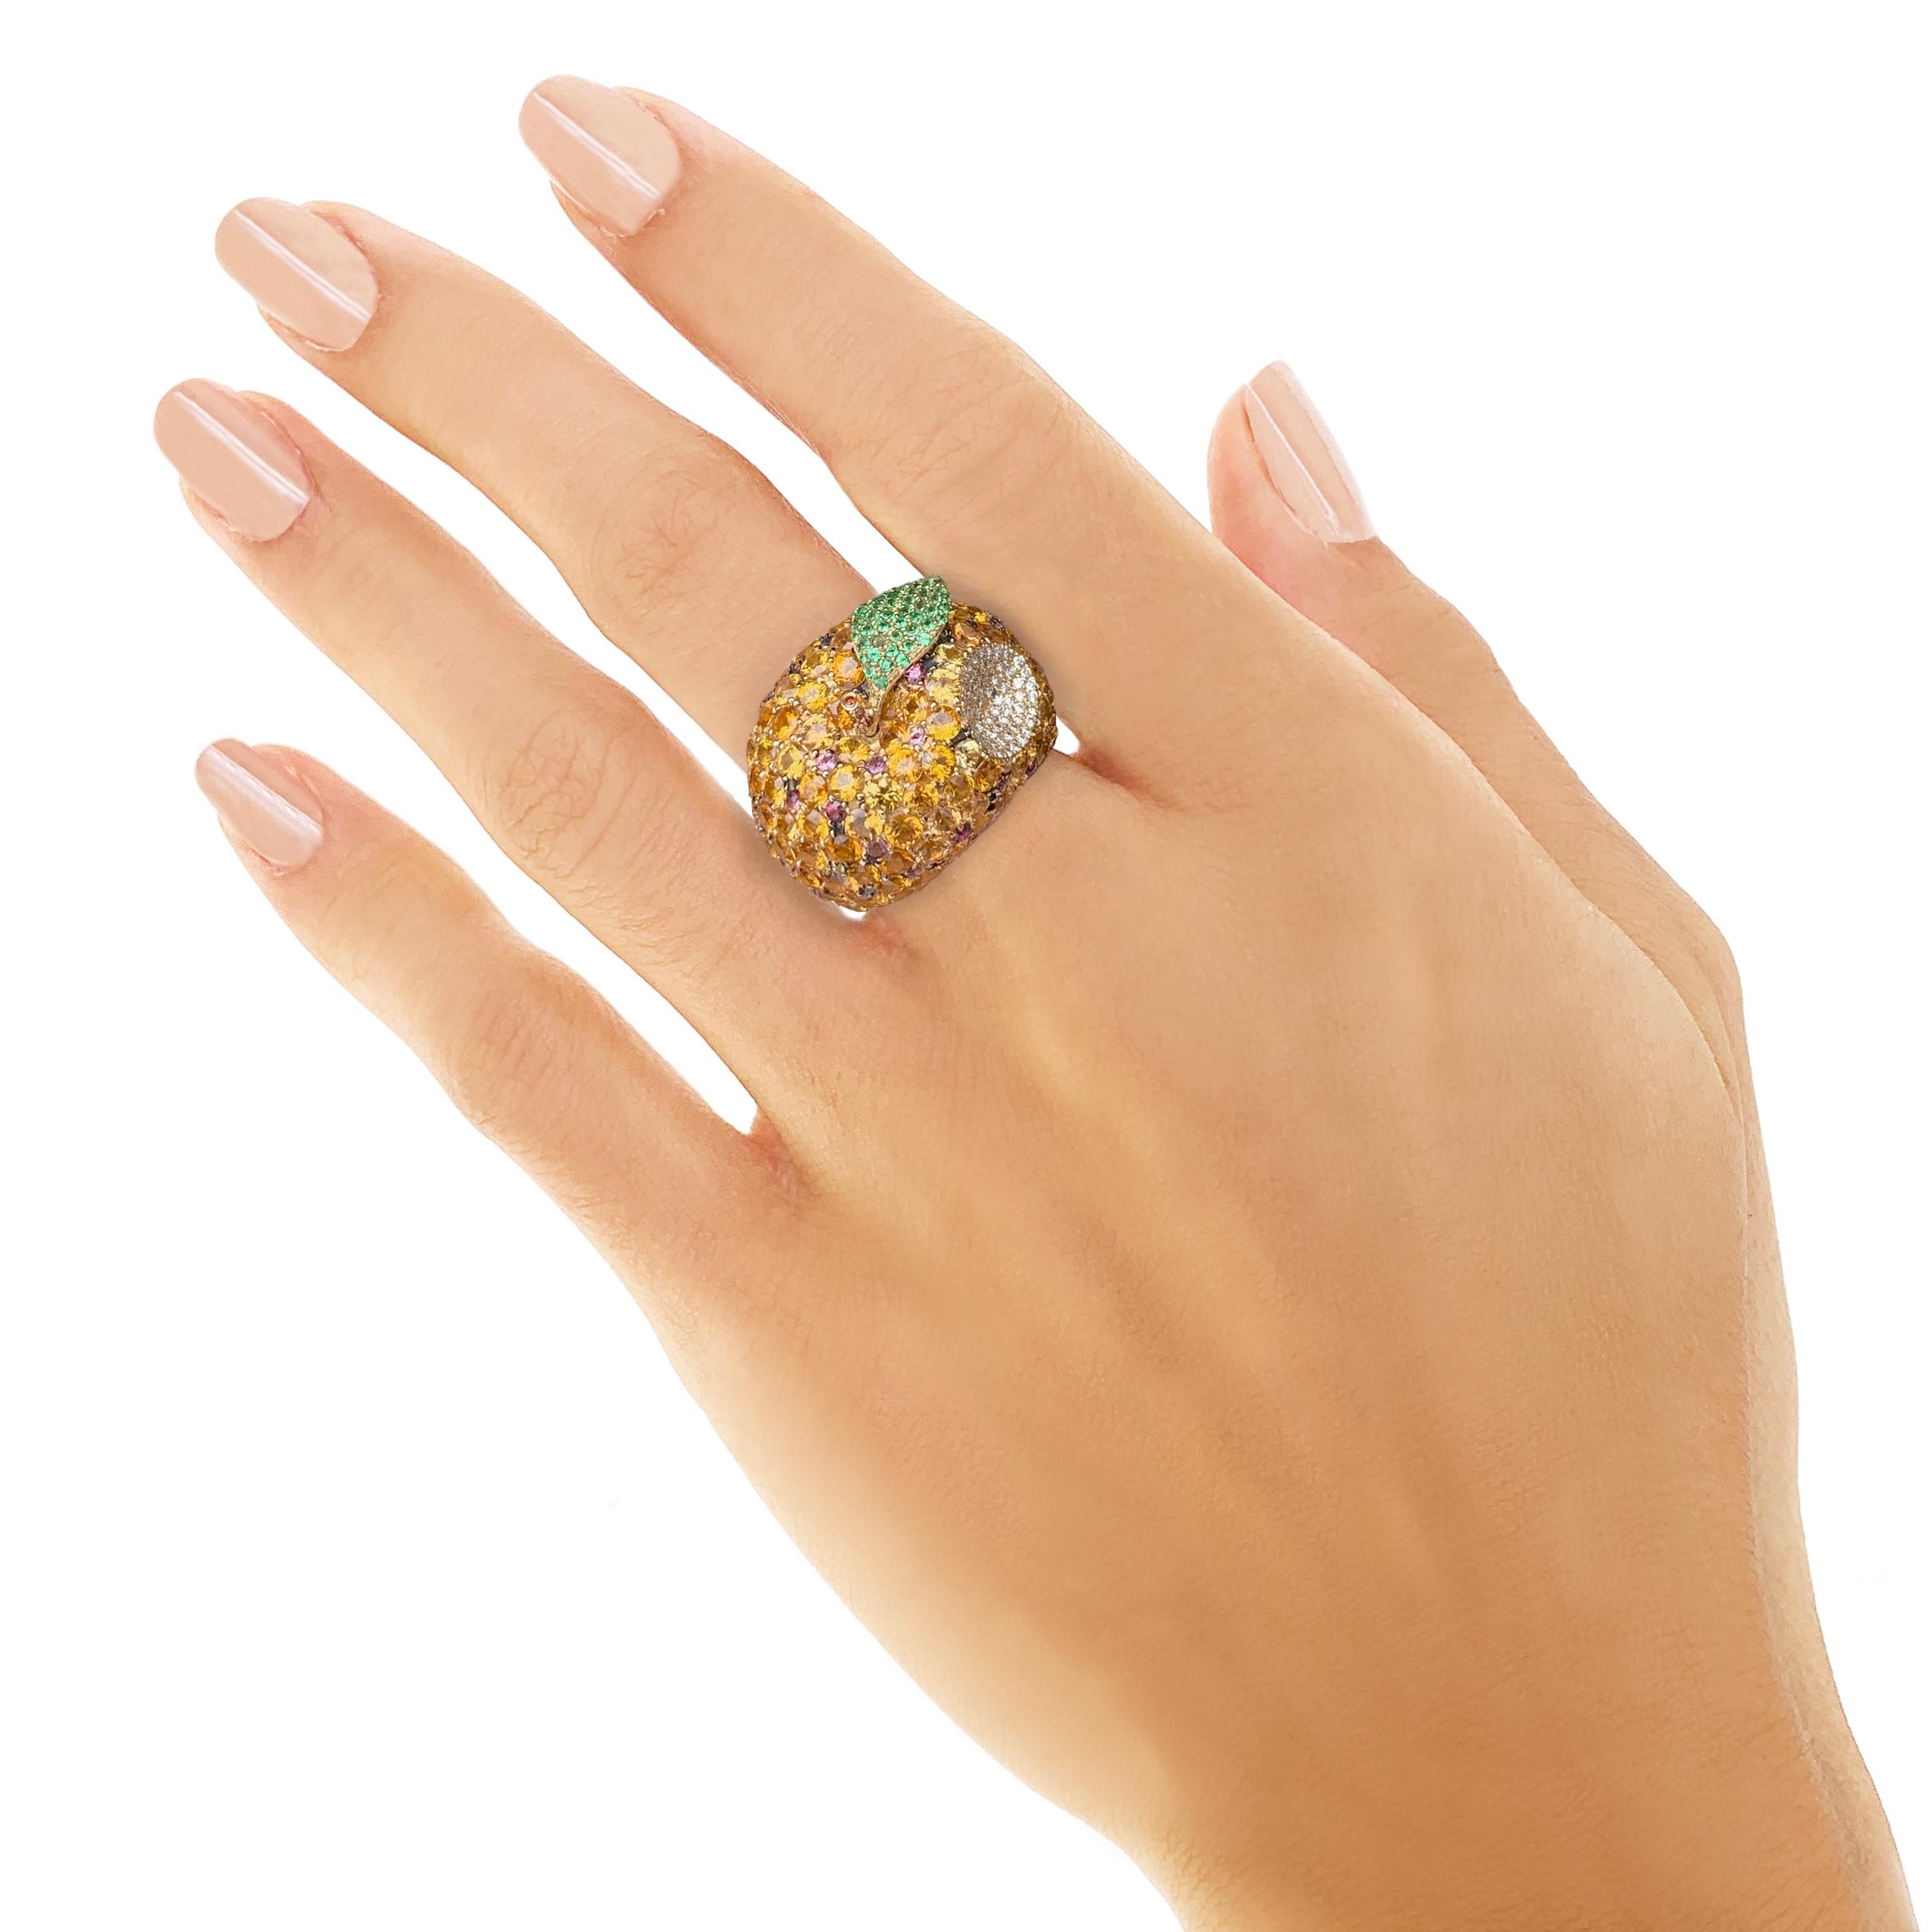 A Rosior by Manuel Rosas 19,2k yellow gold ring featuring a 